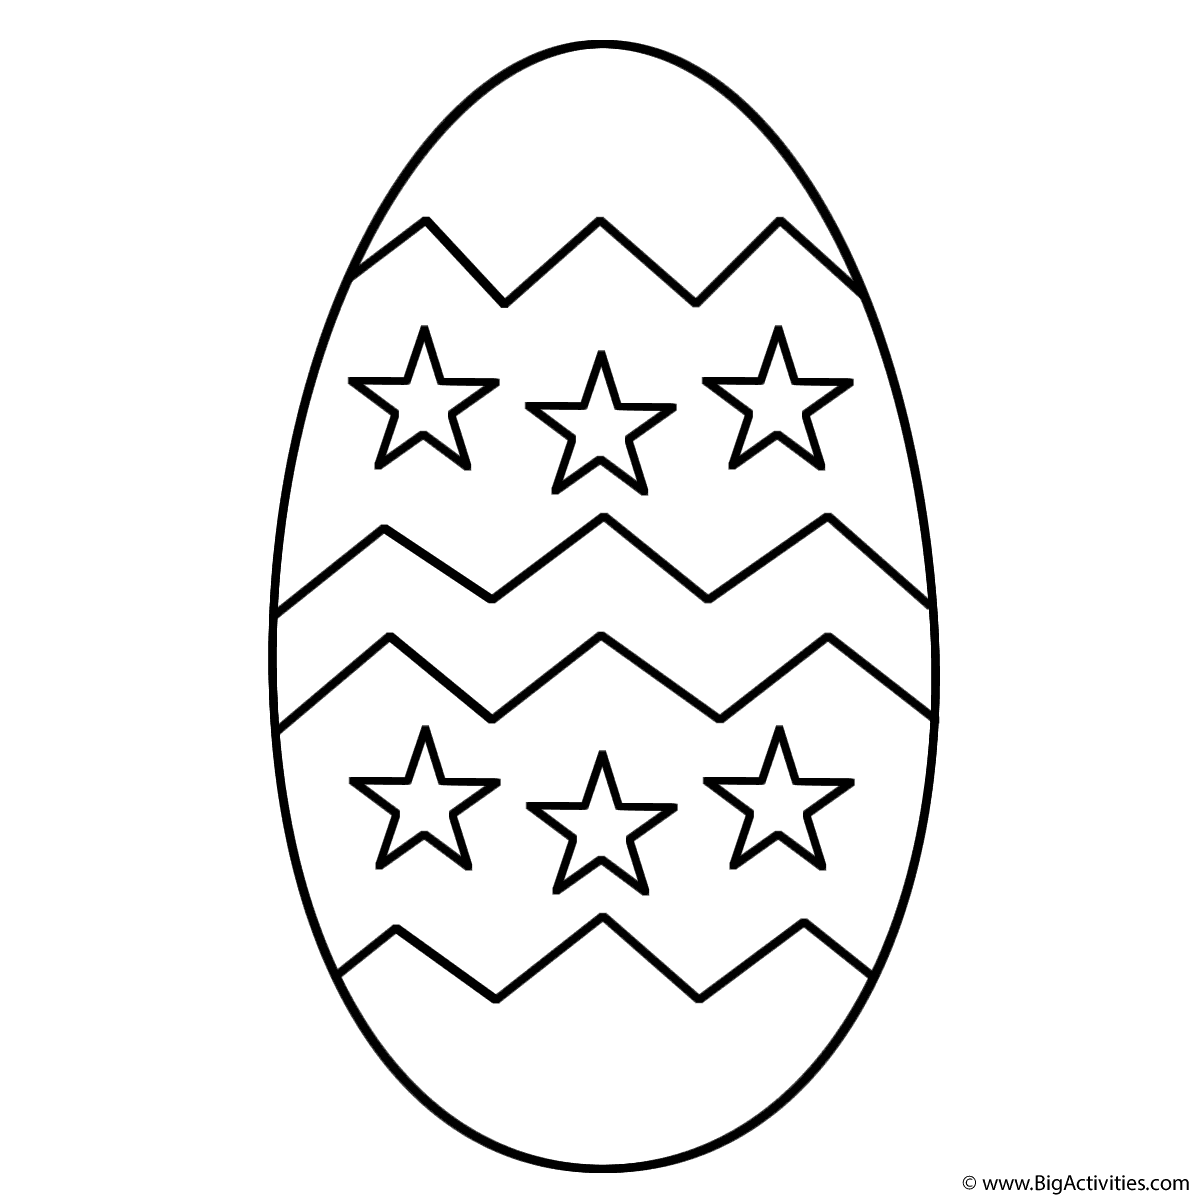 Download Easter Egg with stars and patterns - Coloring Page (Easter)